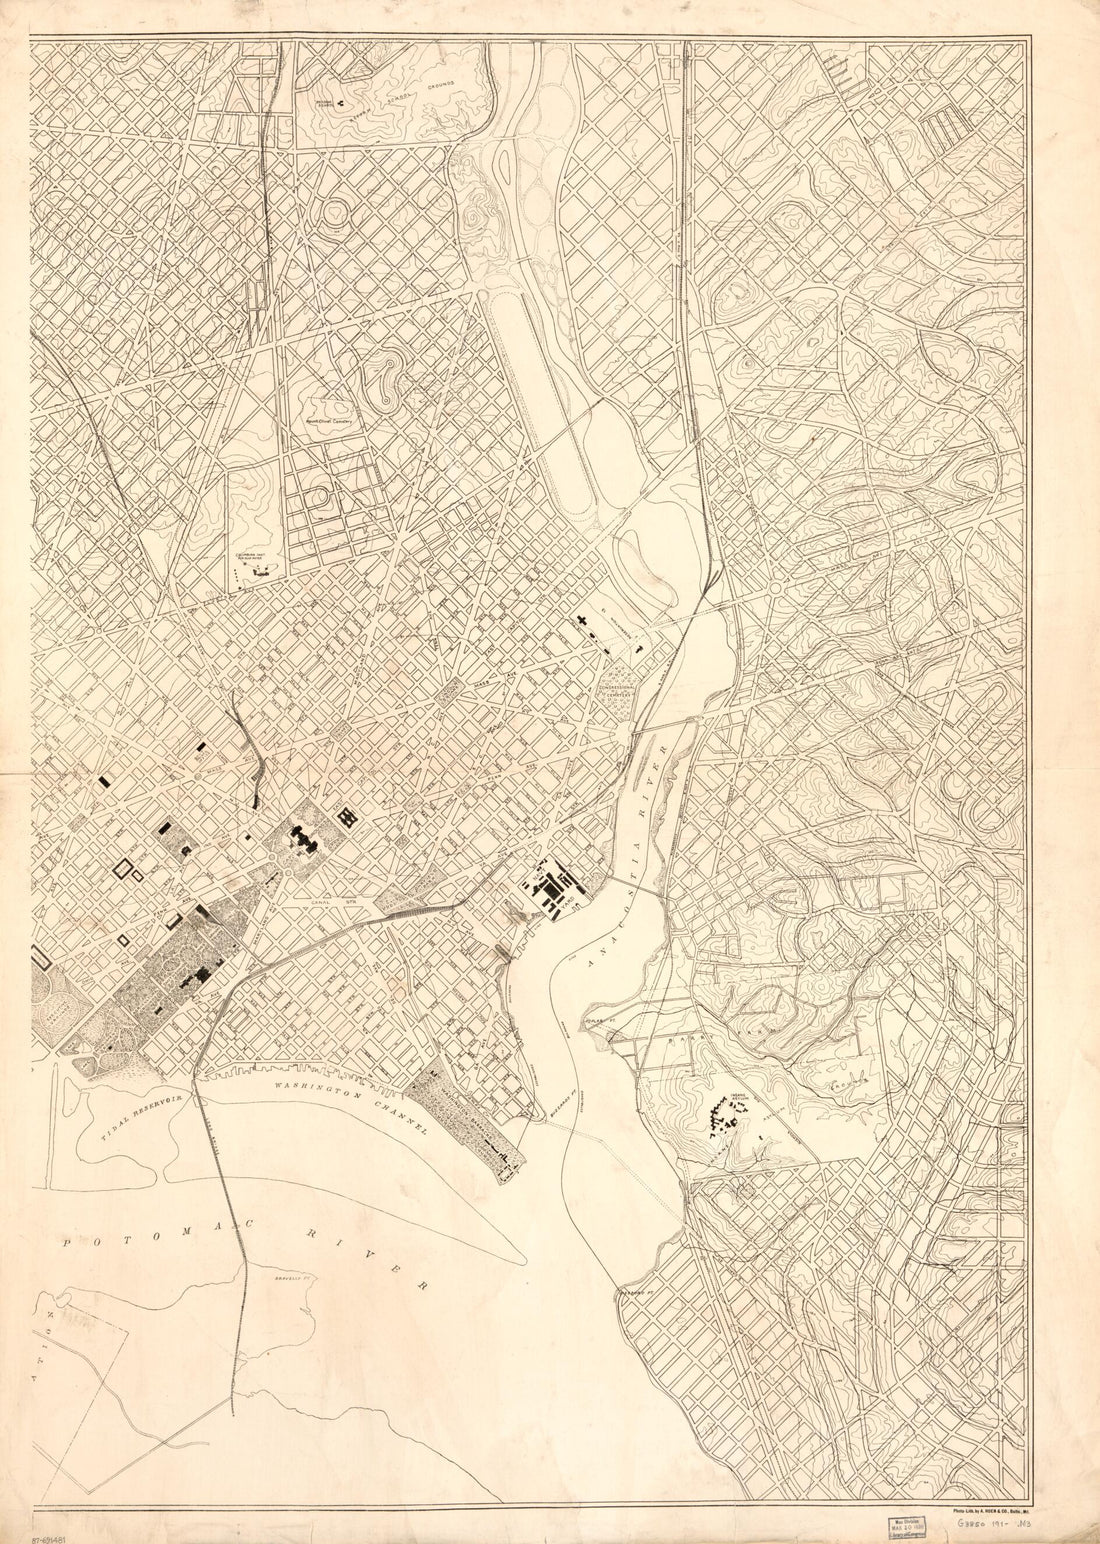 This old map of Map of Washington D.C. from 1910 was created by  A. Hoen &amp; Co in 1910